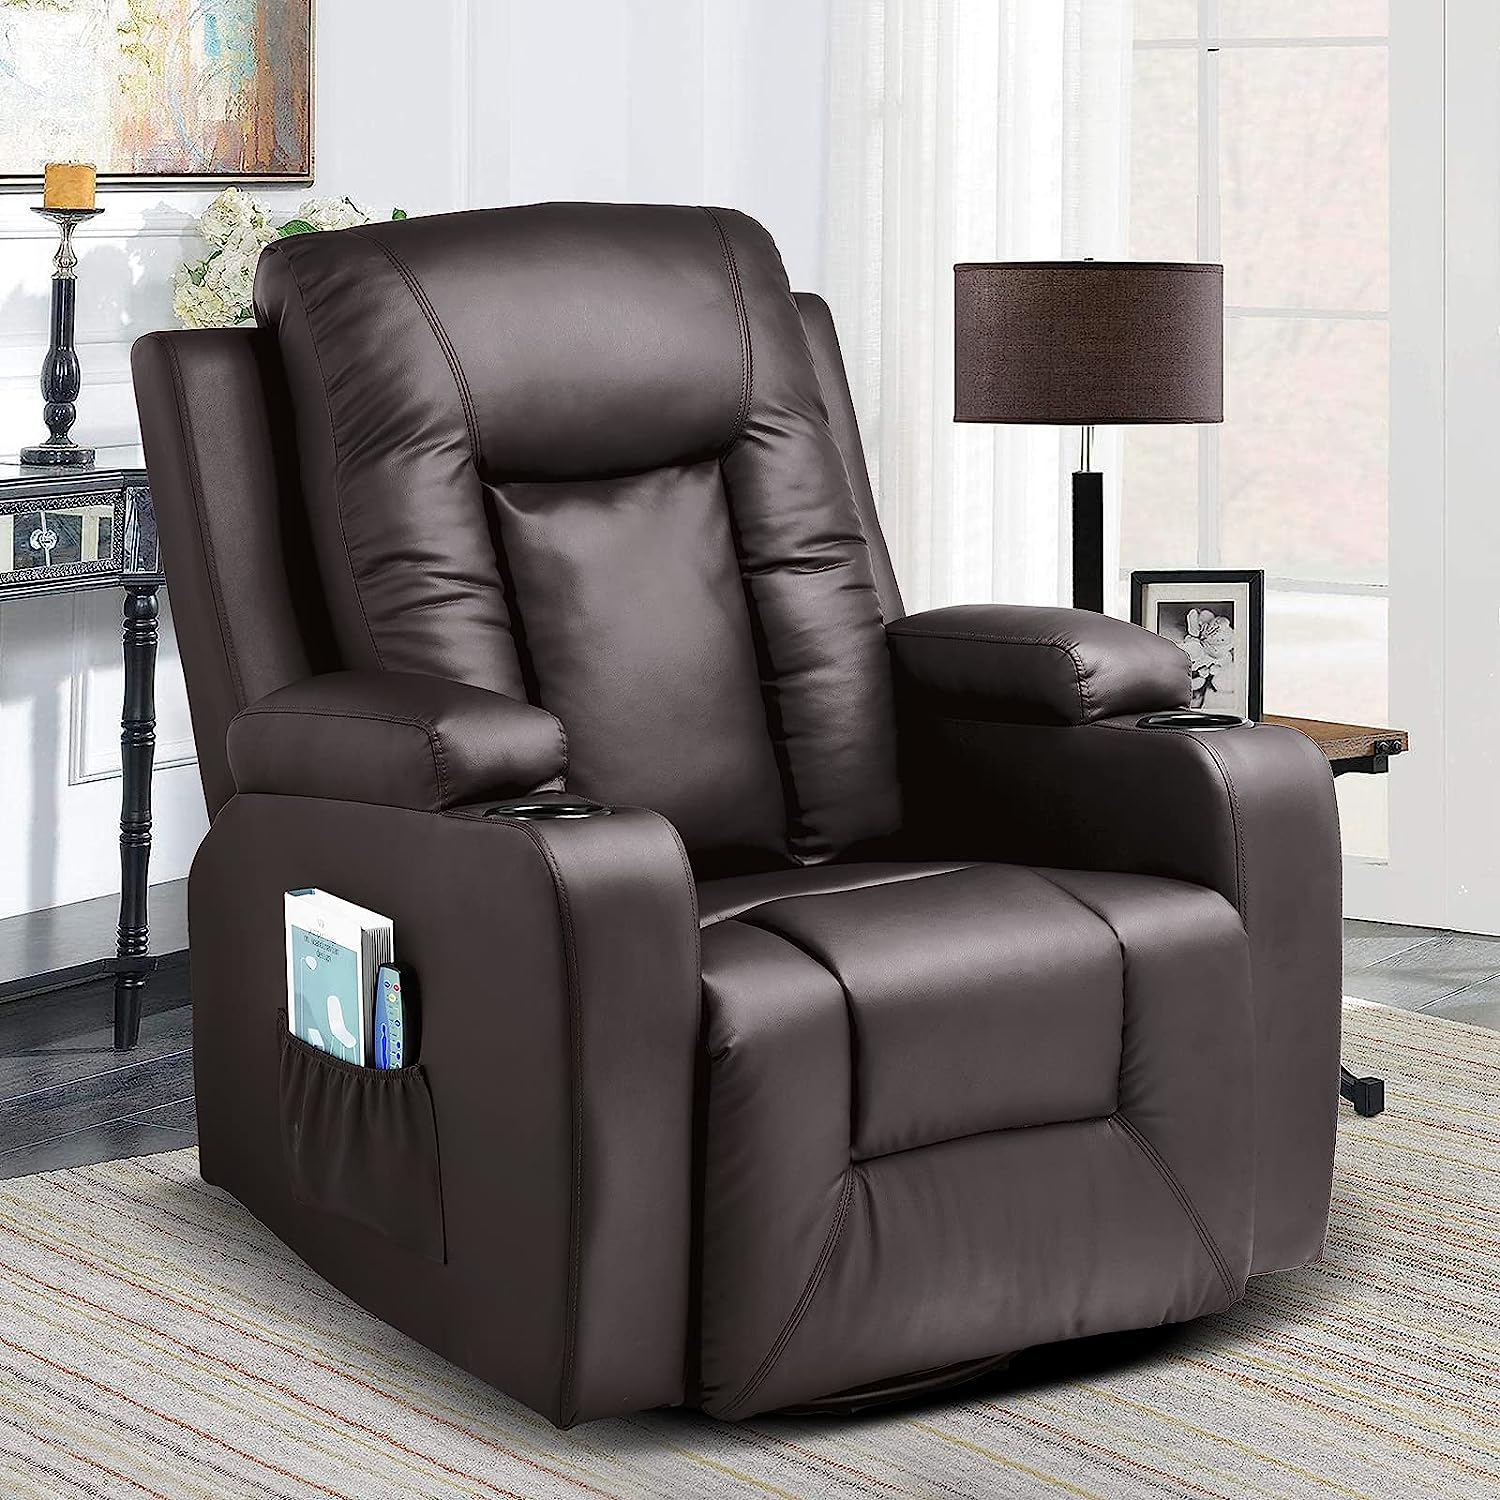 COMHOMA PU Leather Recliner Chair Modern Rocker with [...]